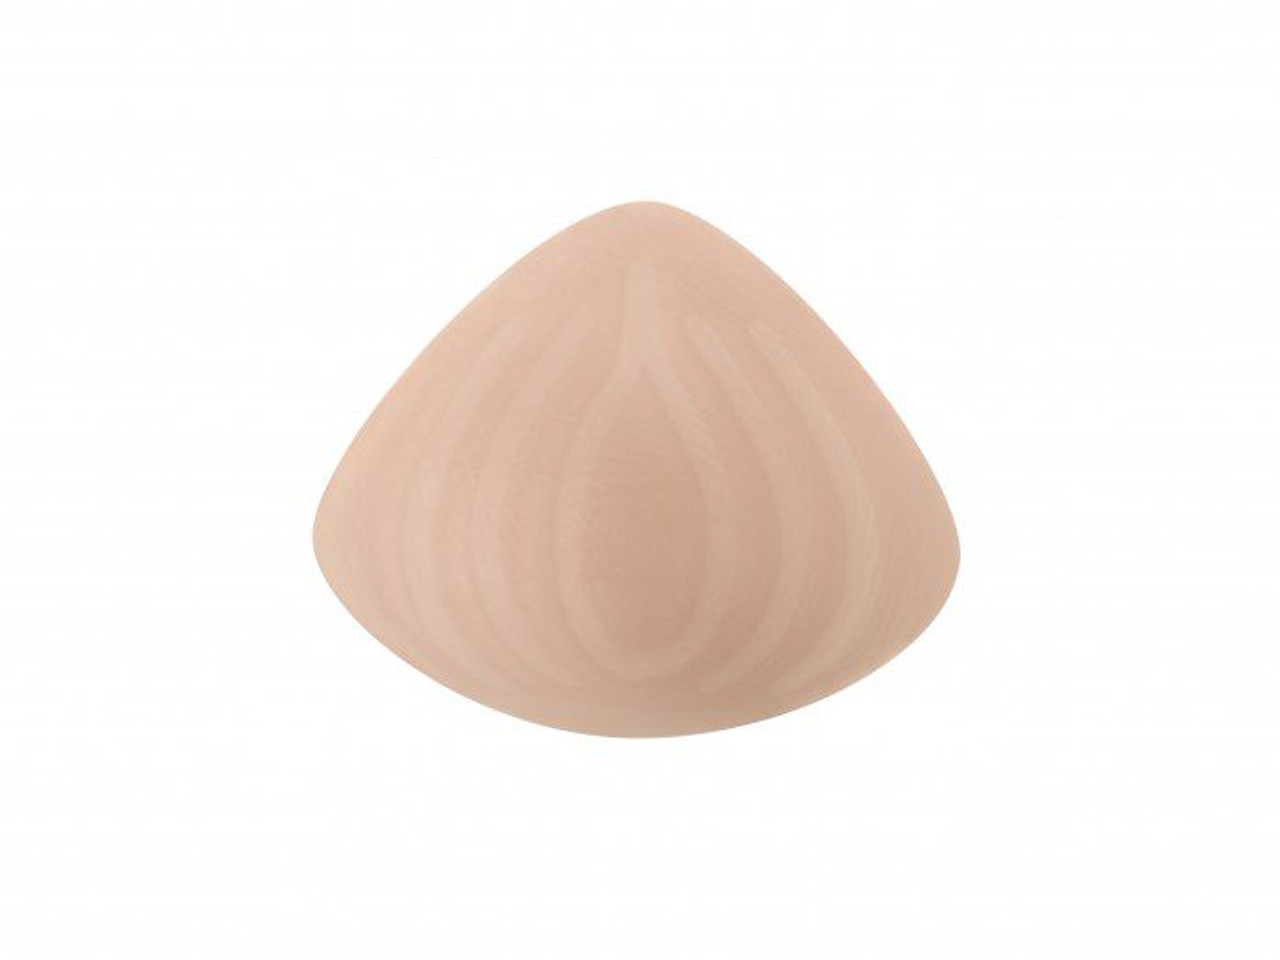 Wider Full Teardrop Silicone Breast Forms